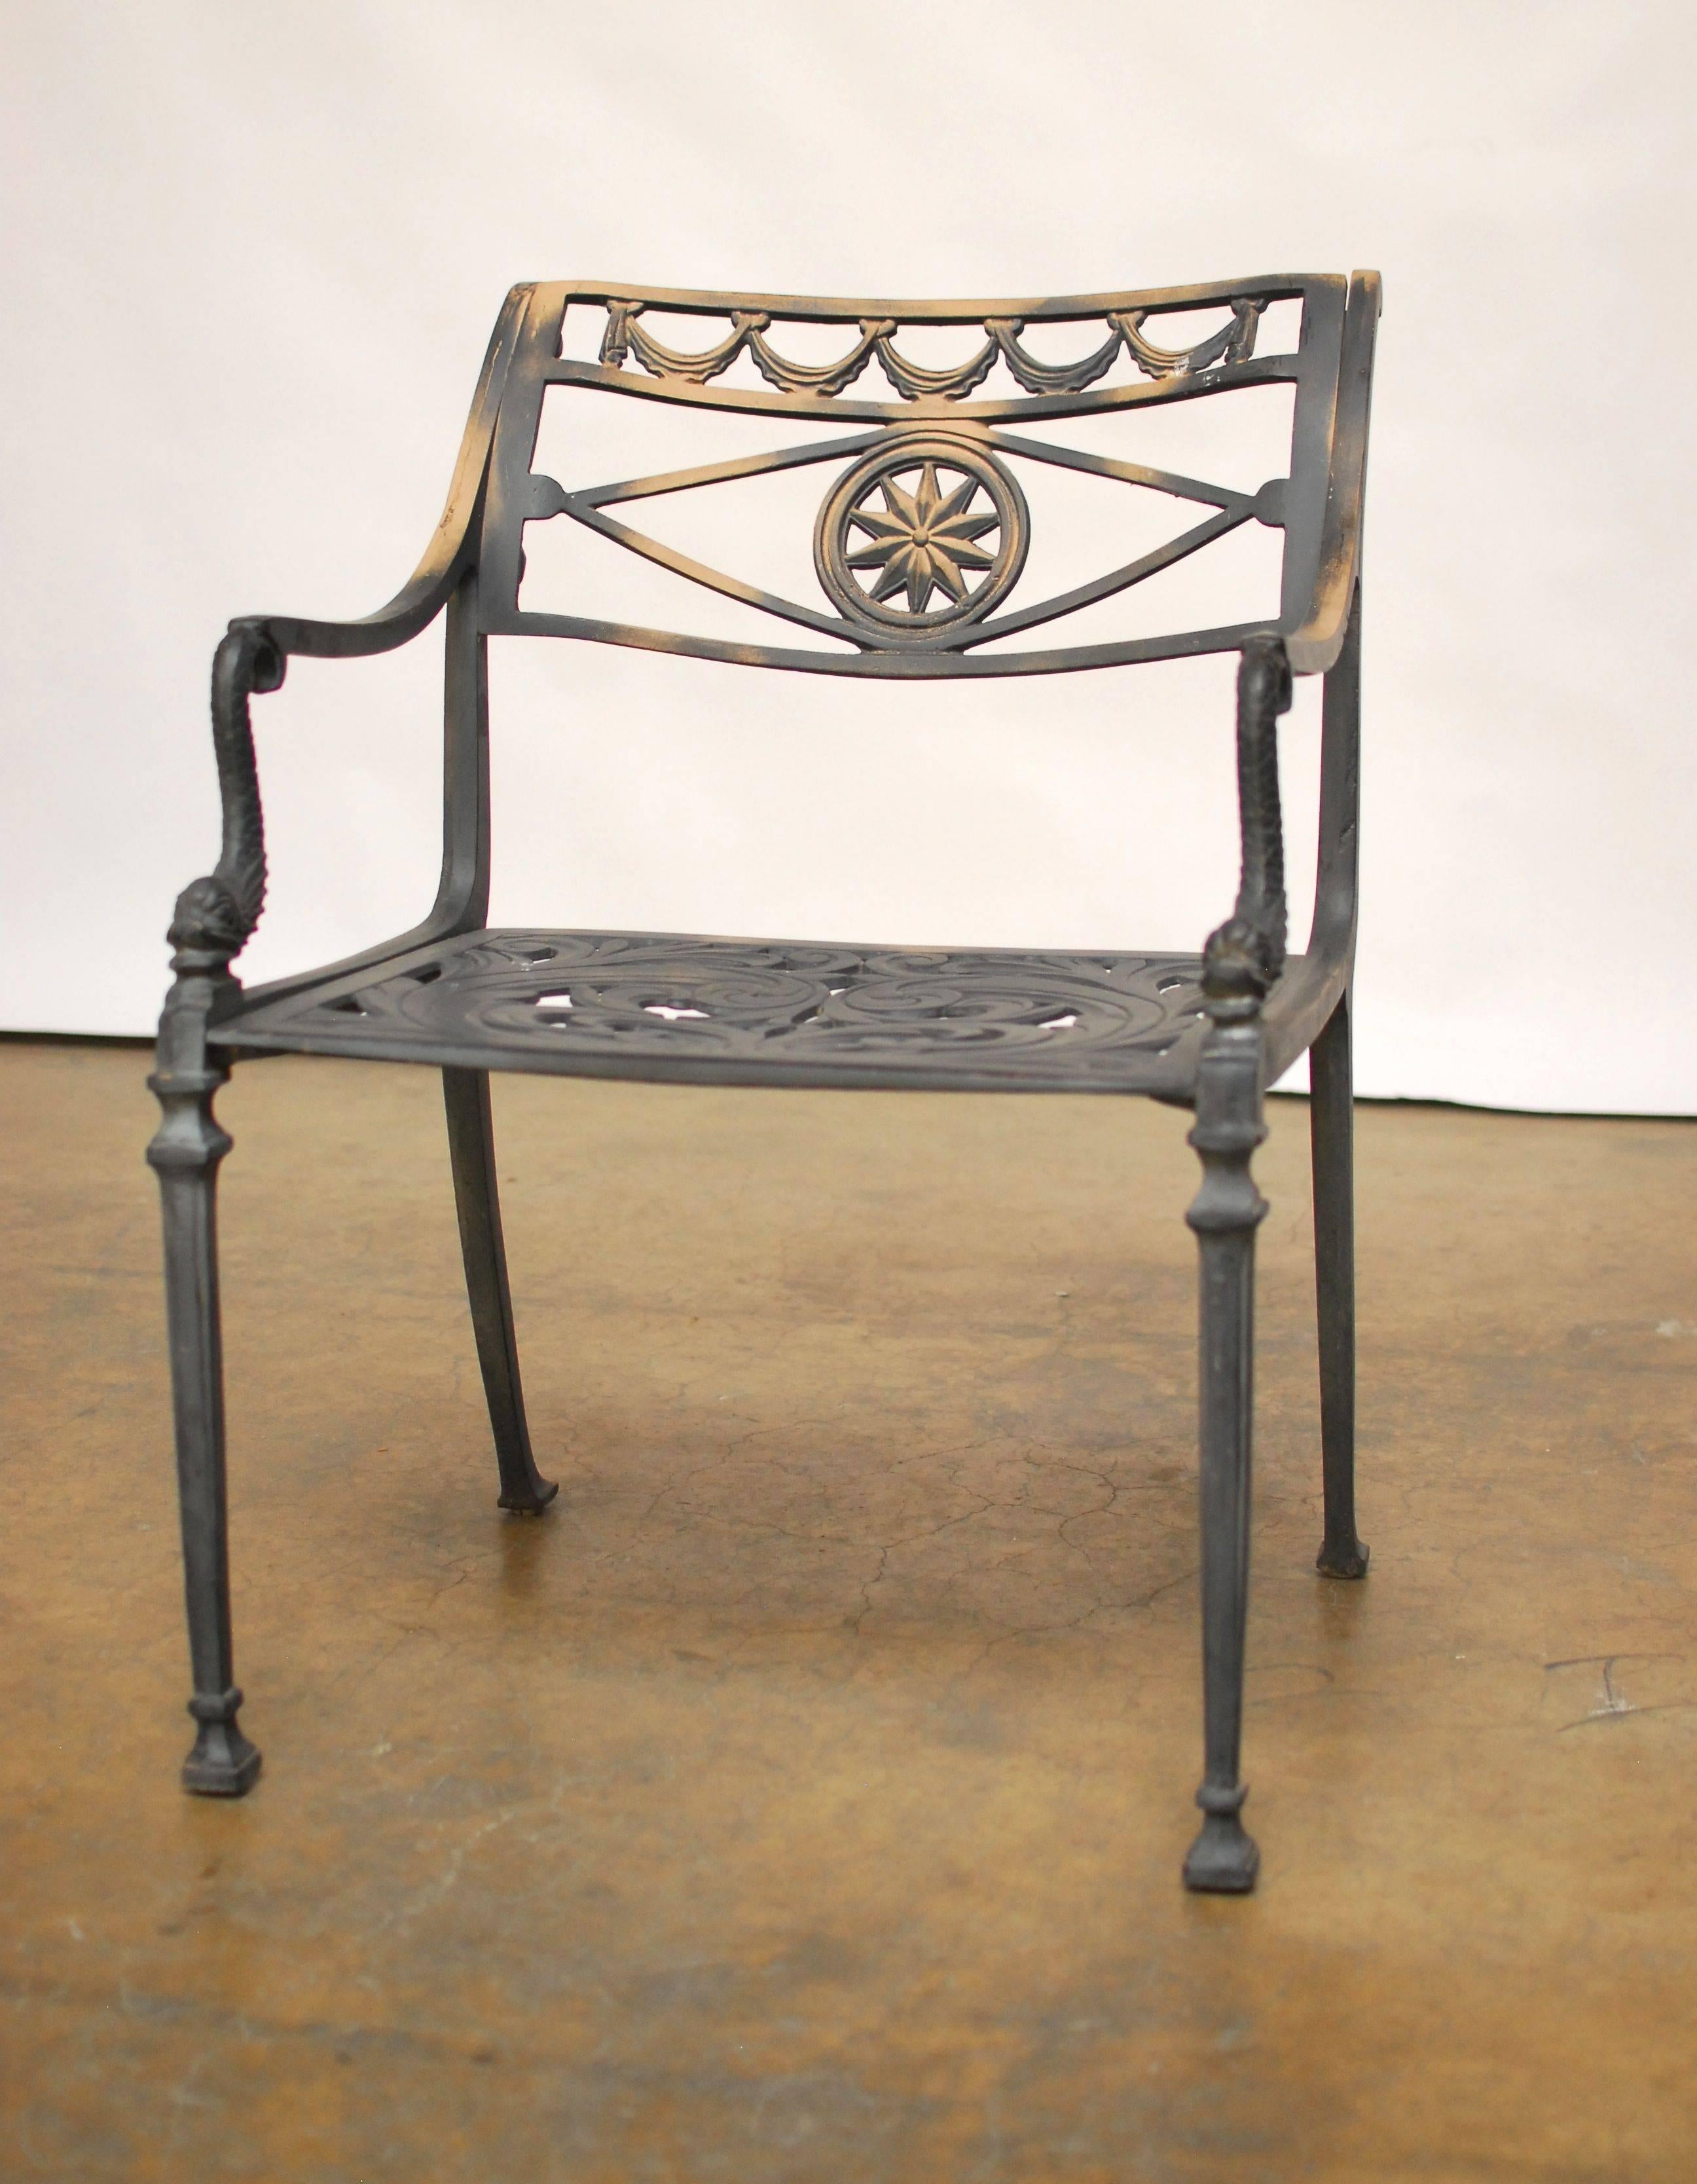 A set of four Directoire style garden armchairs made of cast metal featuring a sun medallion back and dolphin form arms. They have decorative pierced seats and detailed legs. They are a solid construction with a vintage matte patina finish. Very